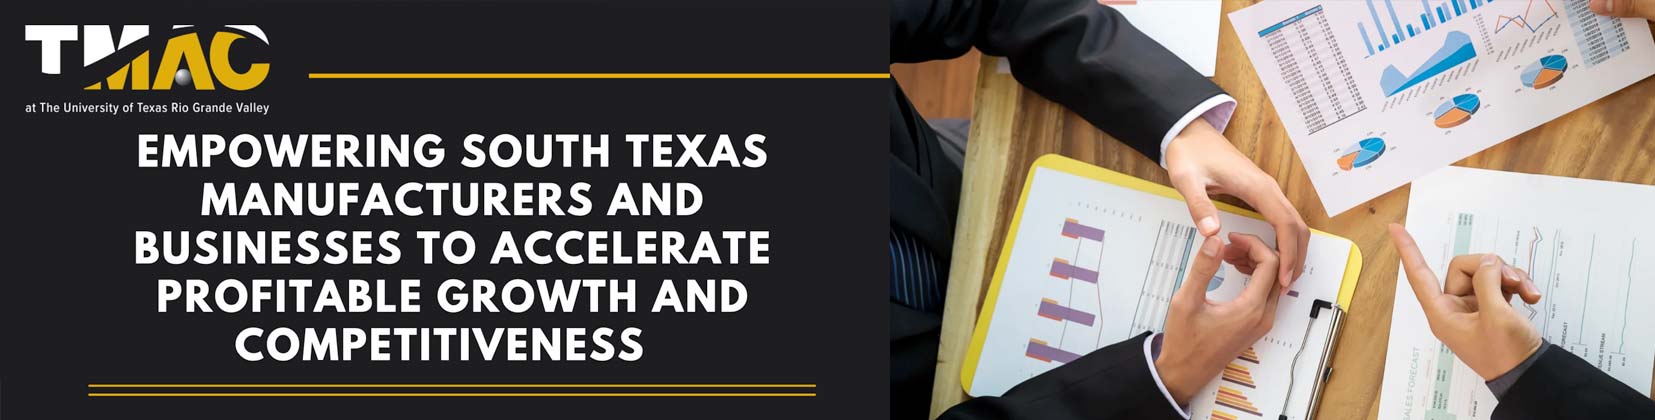 Empowering south texas manufacturers and businesses to accelerate profitable growth and competitiveness Page Banner 